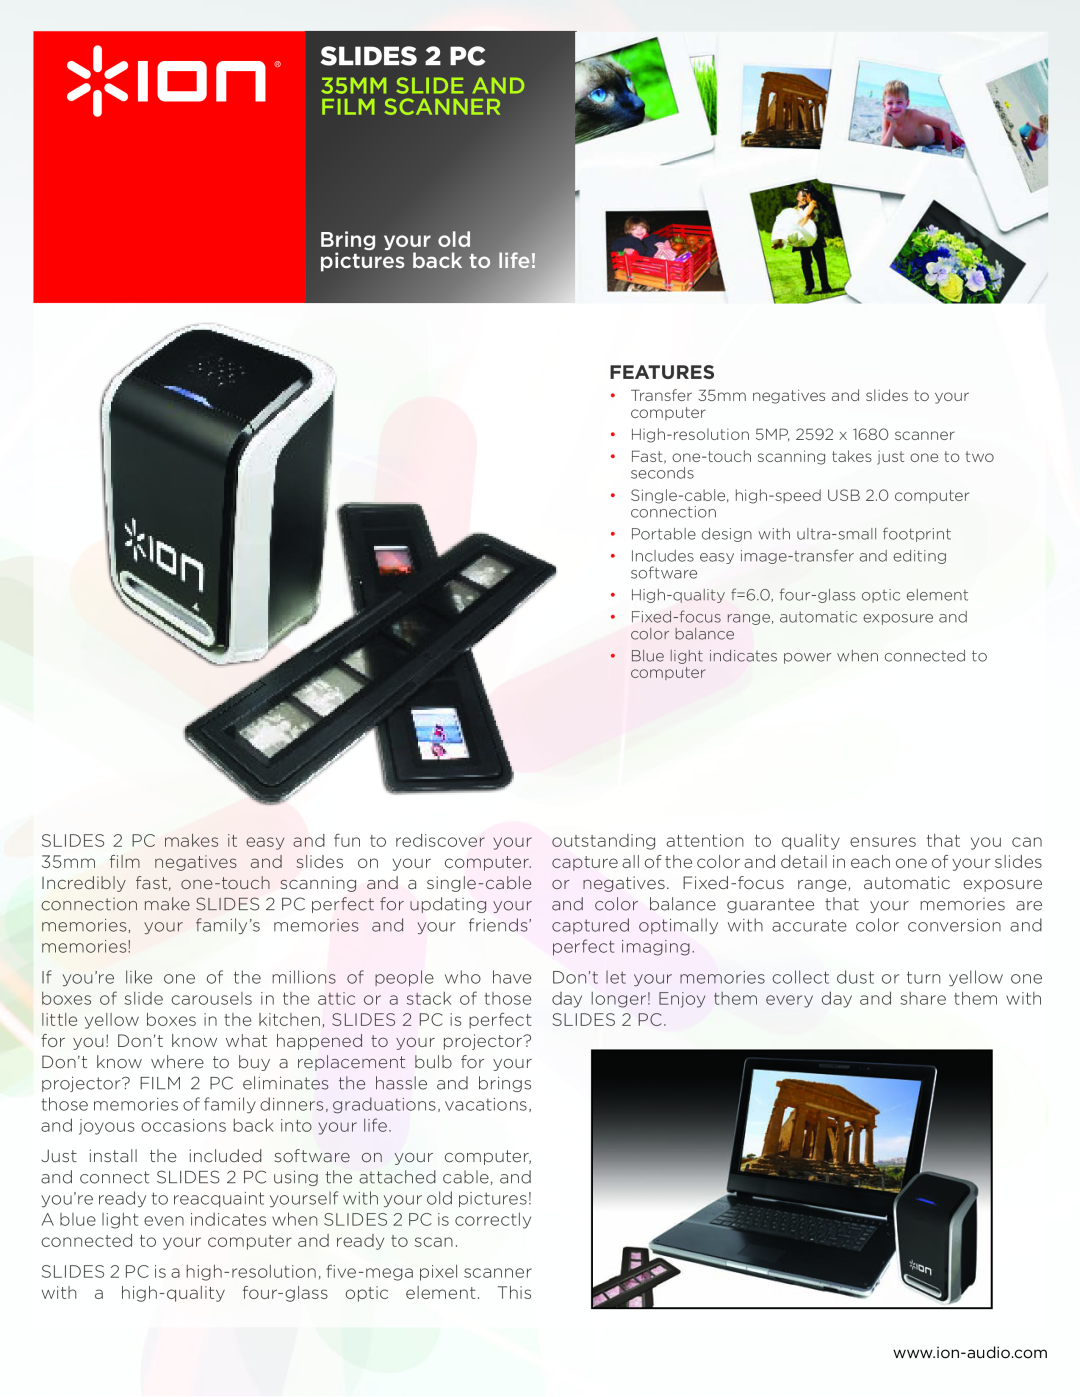 ION SLIDES2PC manual SLIDES 2 PC, 35MM SLIDE AND FILM SCANNER, Bring your old pictures back to life, Features 